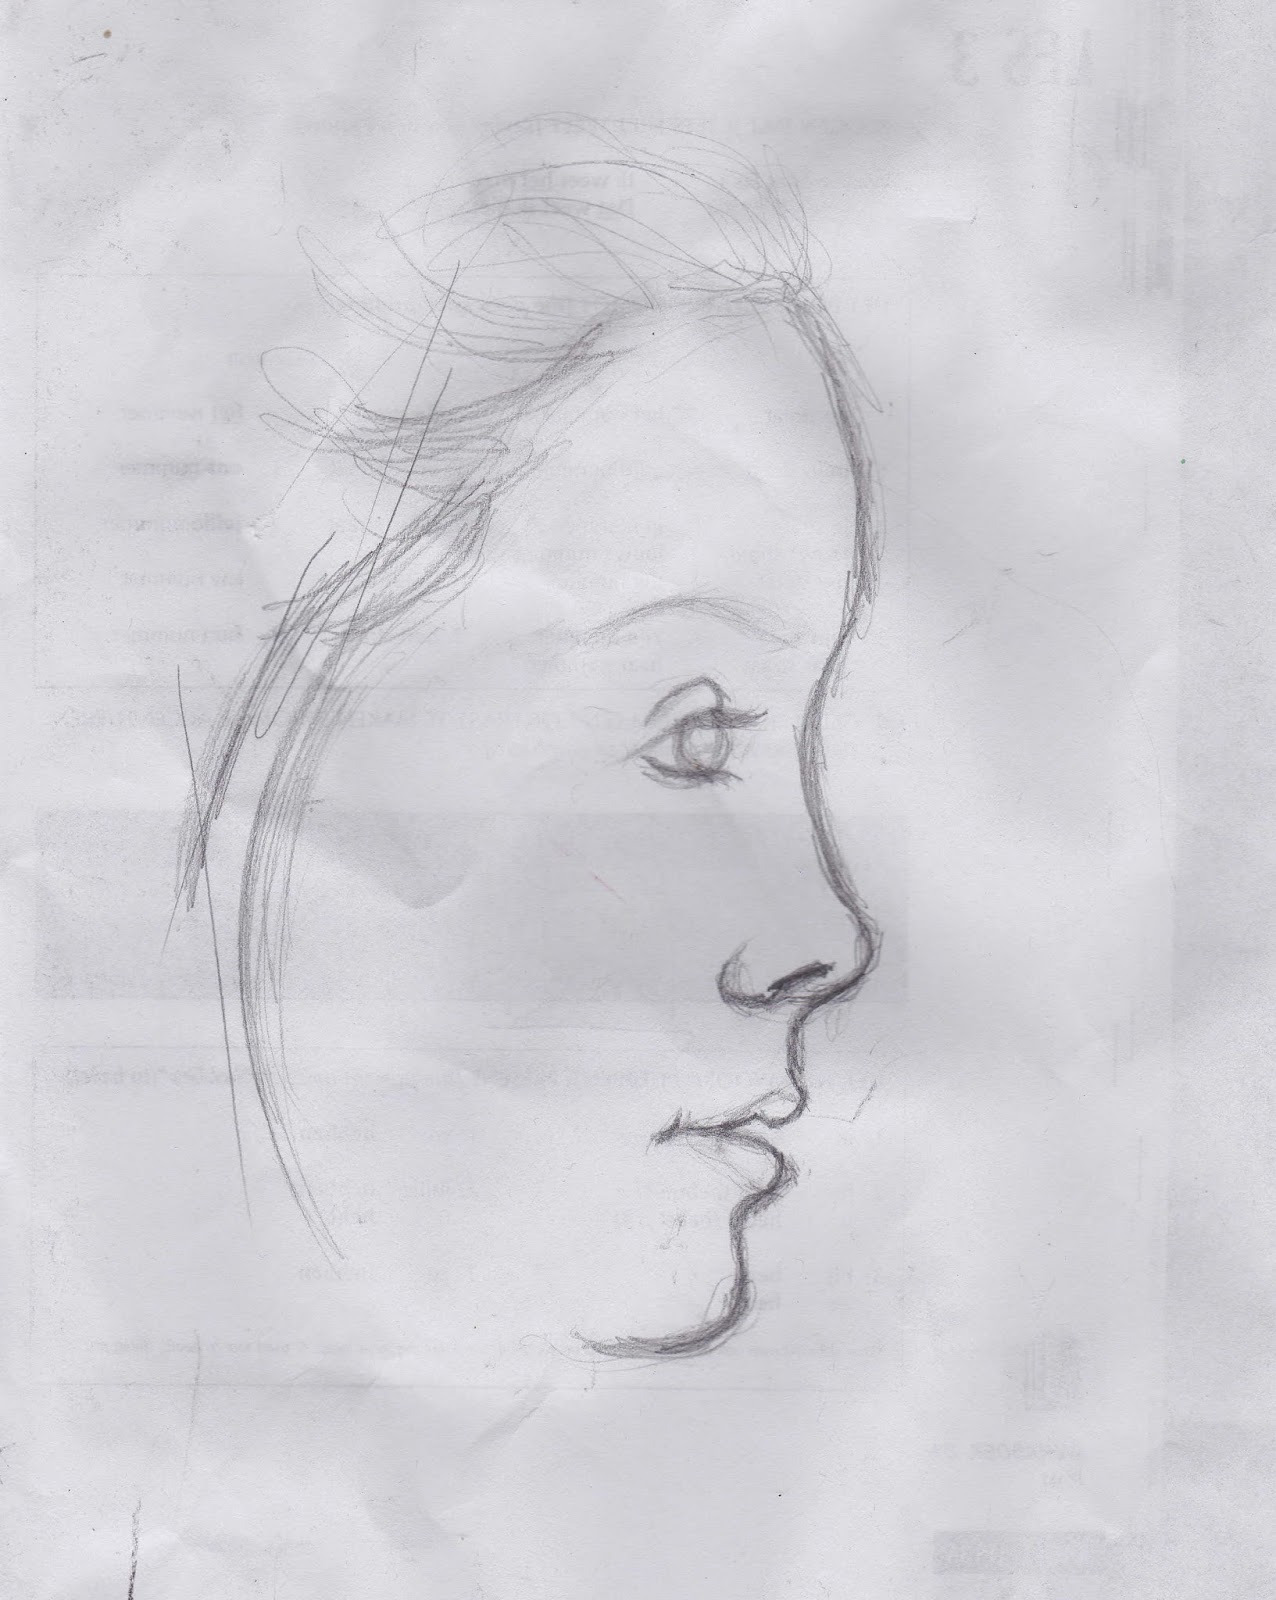 Profile Sketch of Isabella, pencil drawing on paper